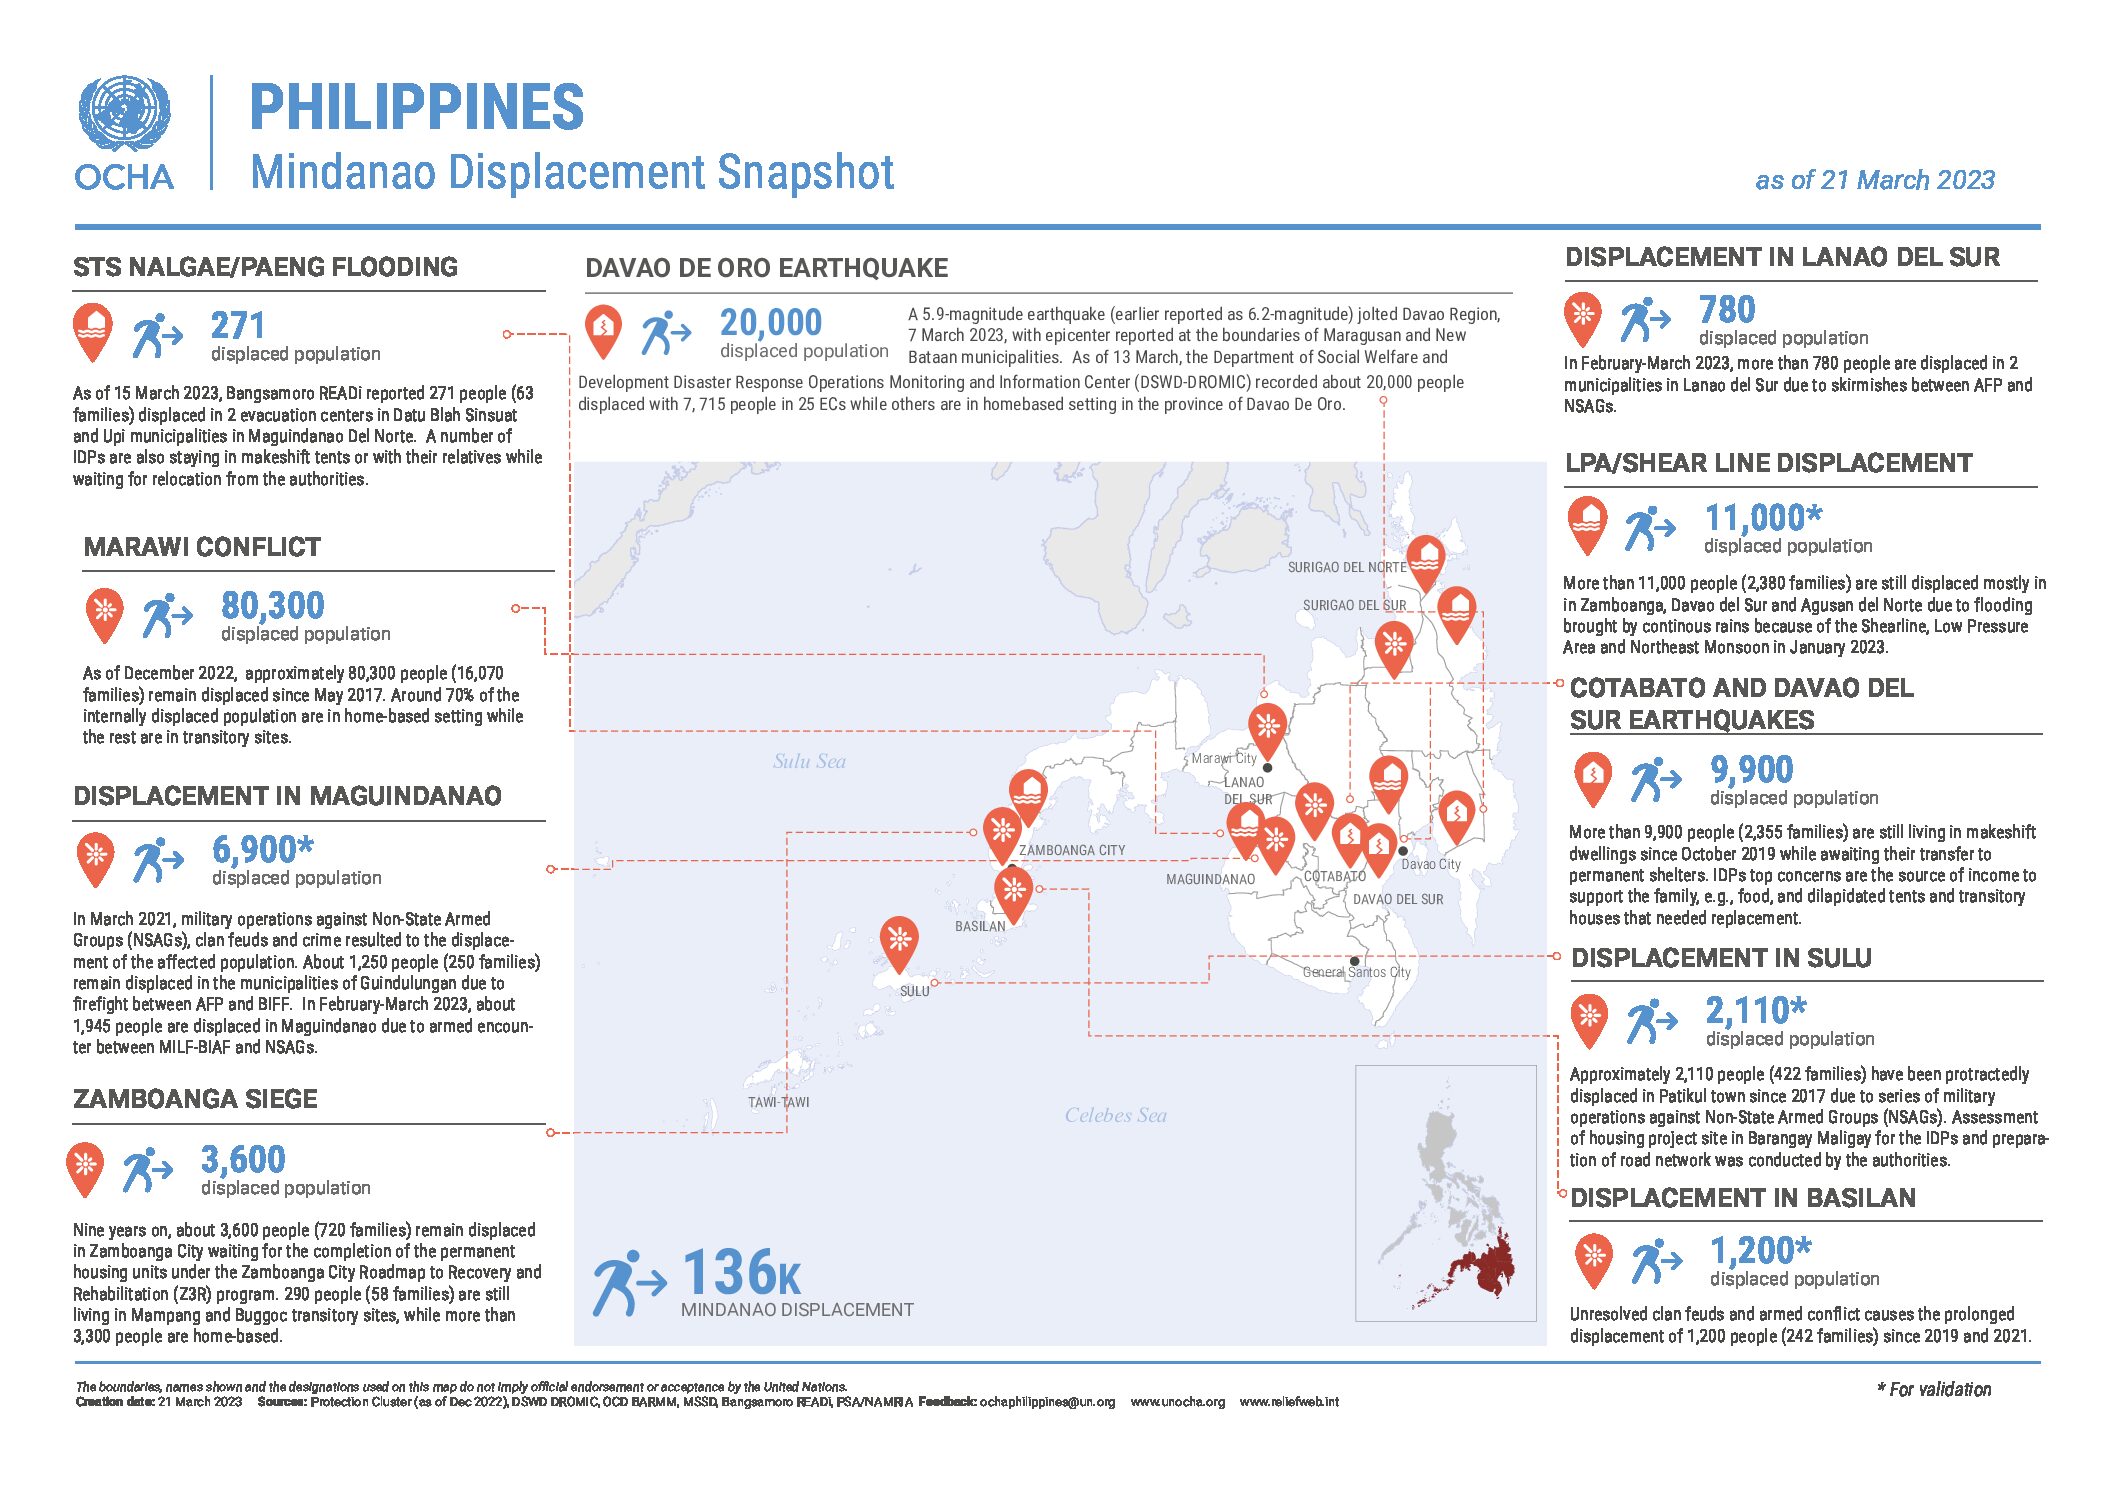 Philippines: Mindanao Displacement Snapshot as of 21 March 2023